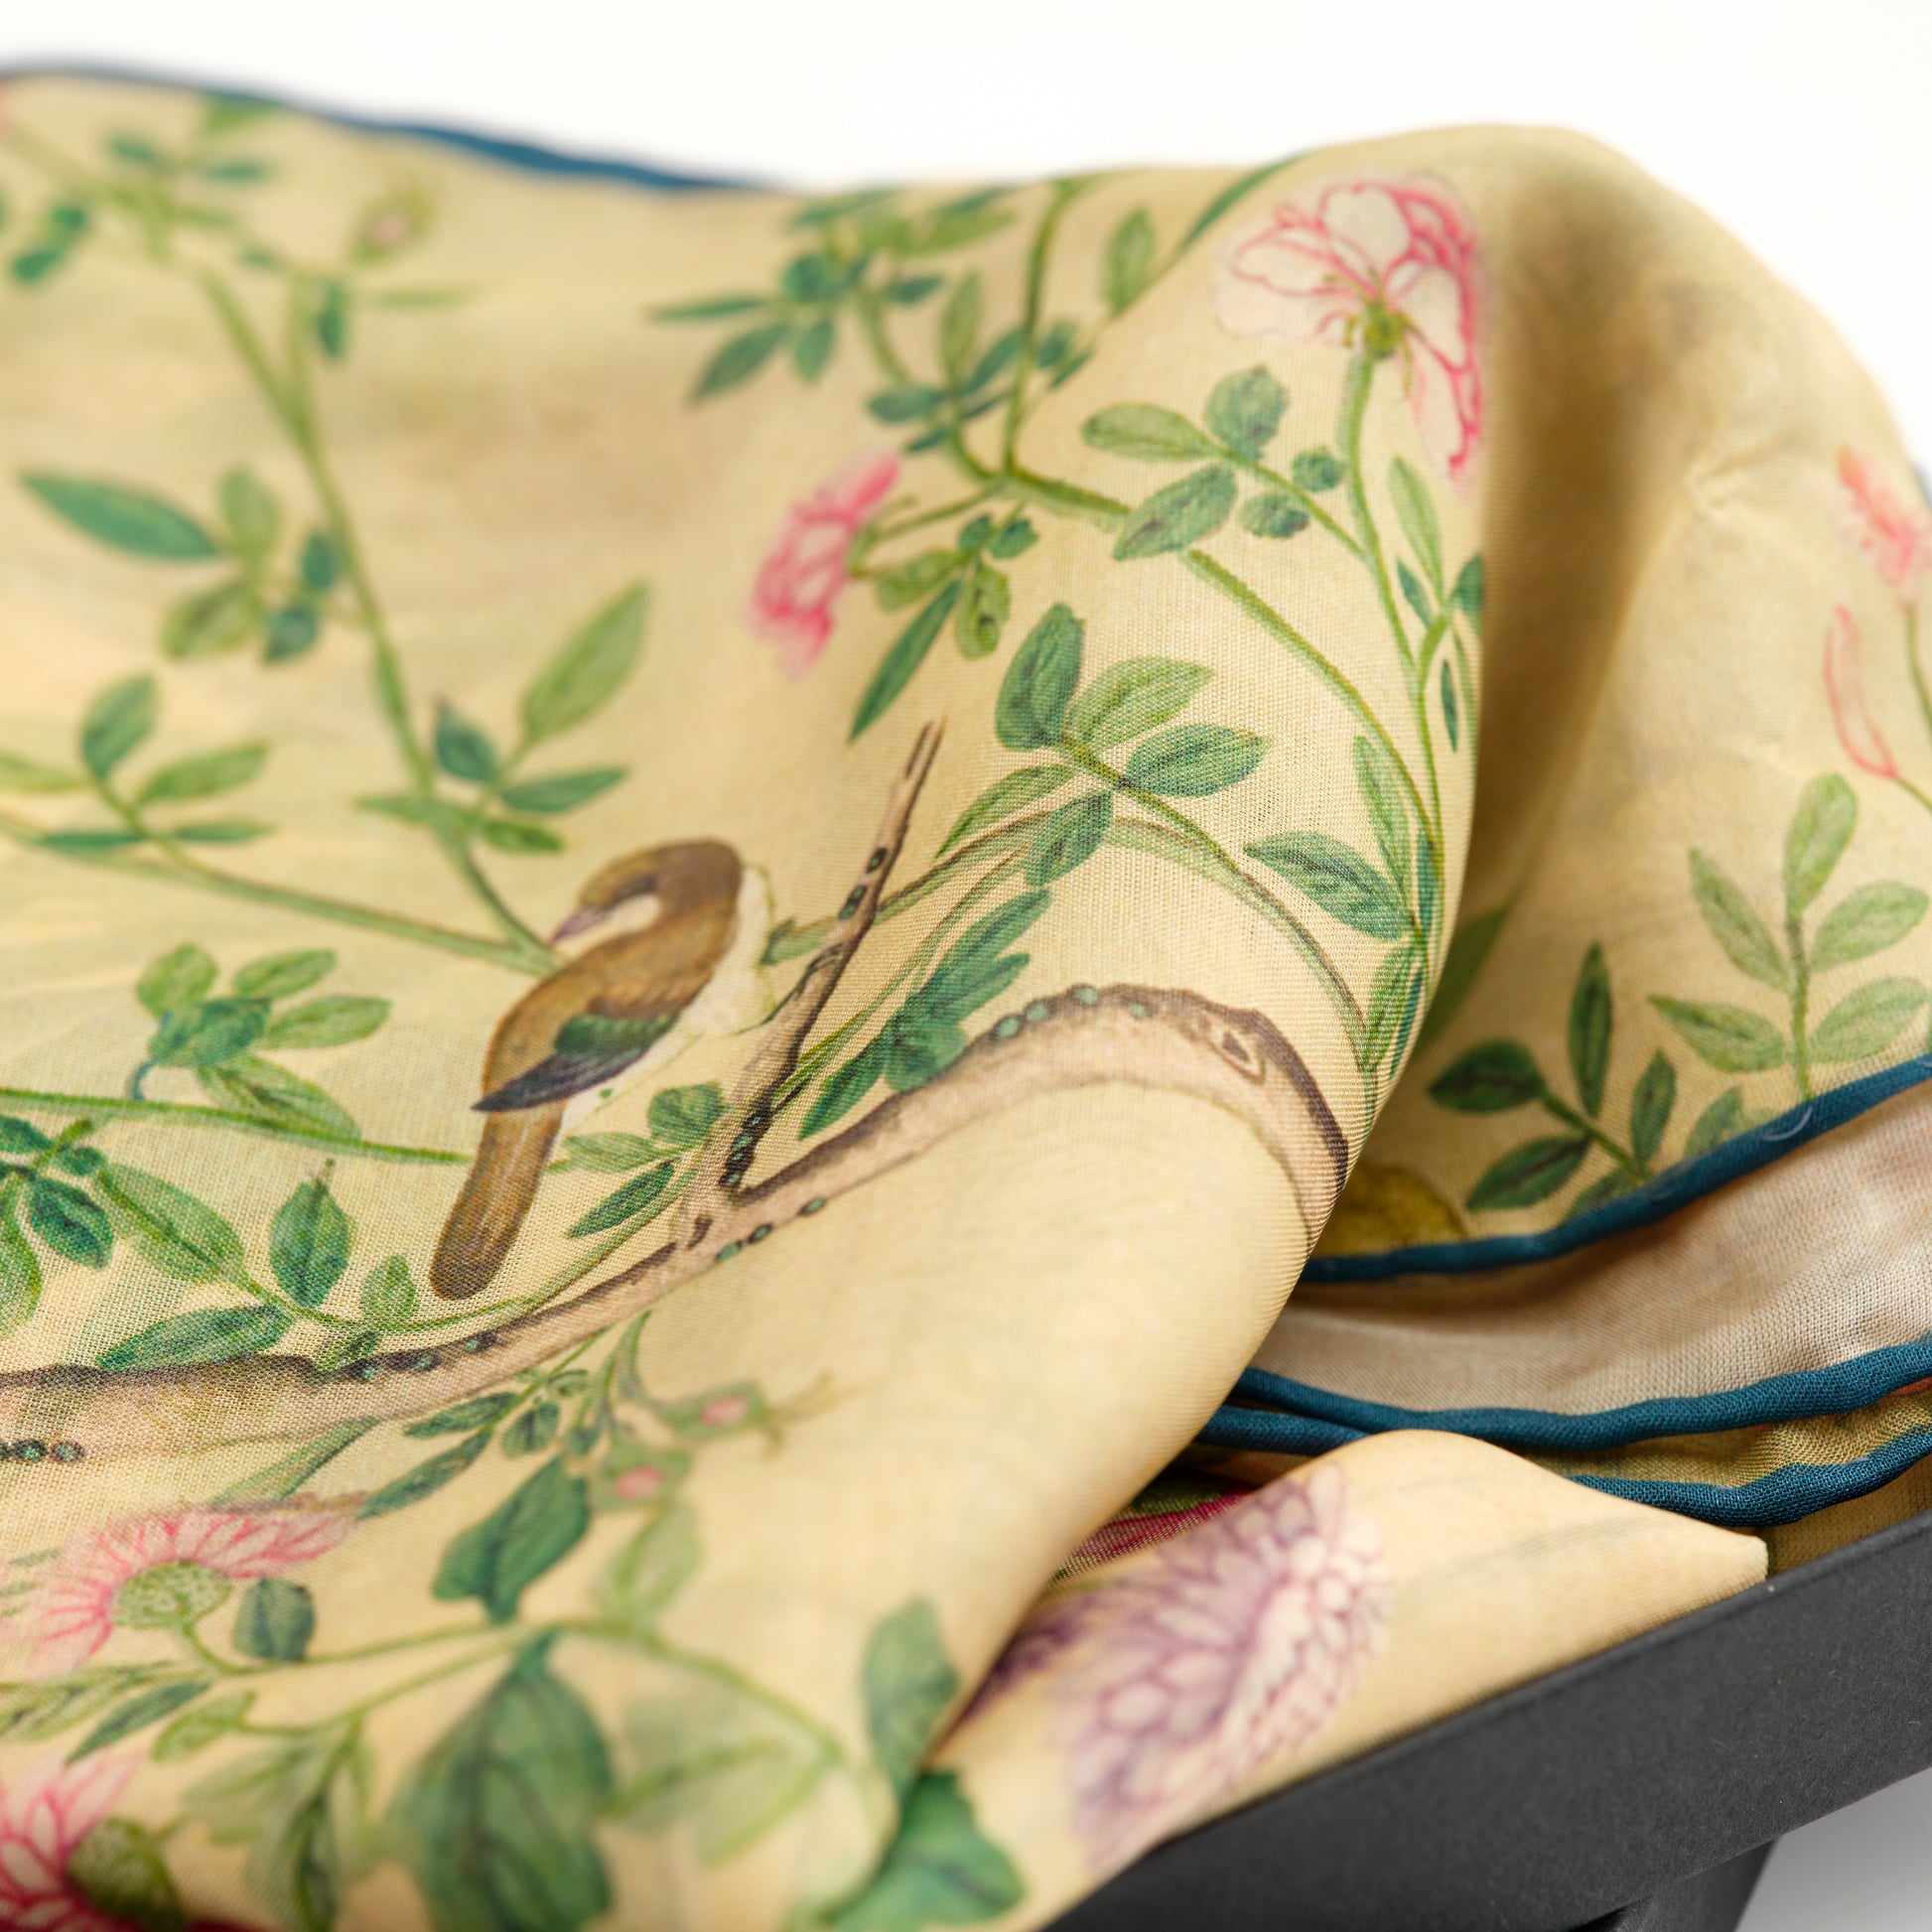 A close up look at a pastel yellow chiffon scarf decorated with birds, flowers and tree branches.